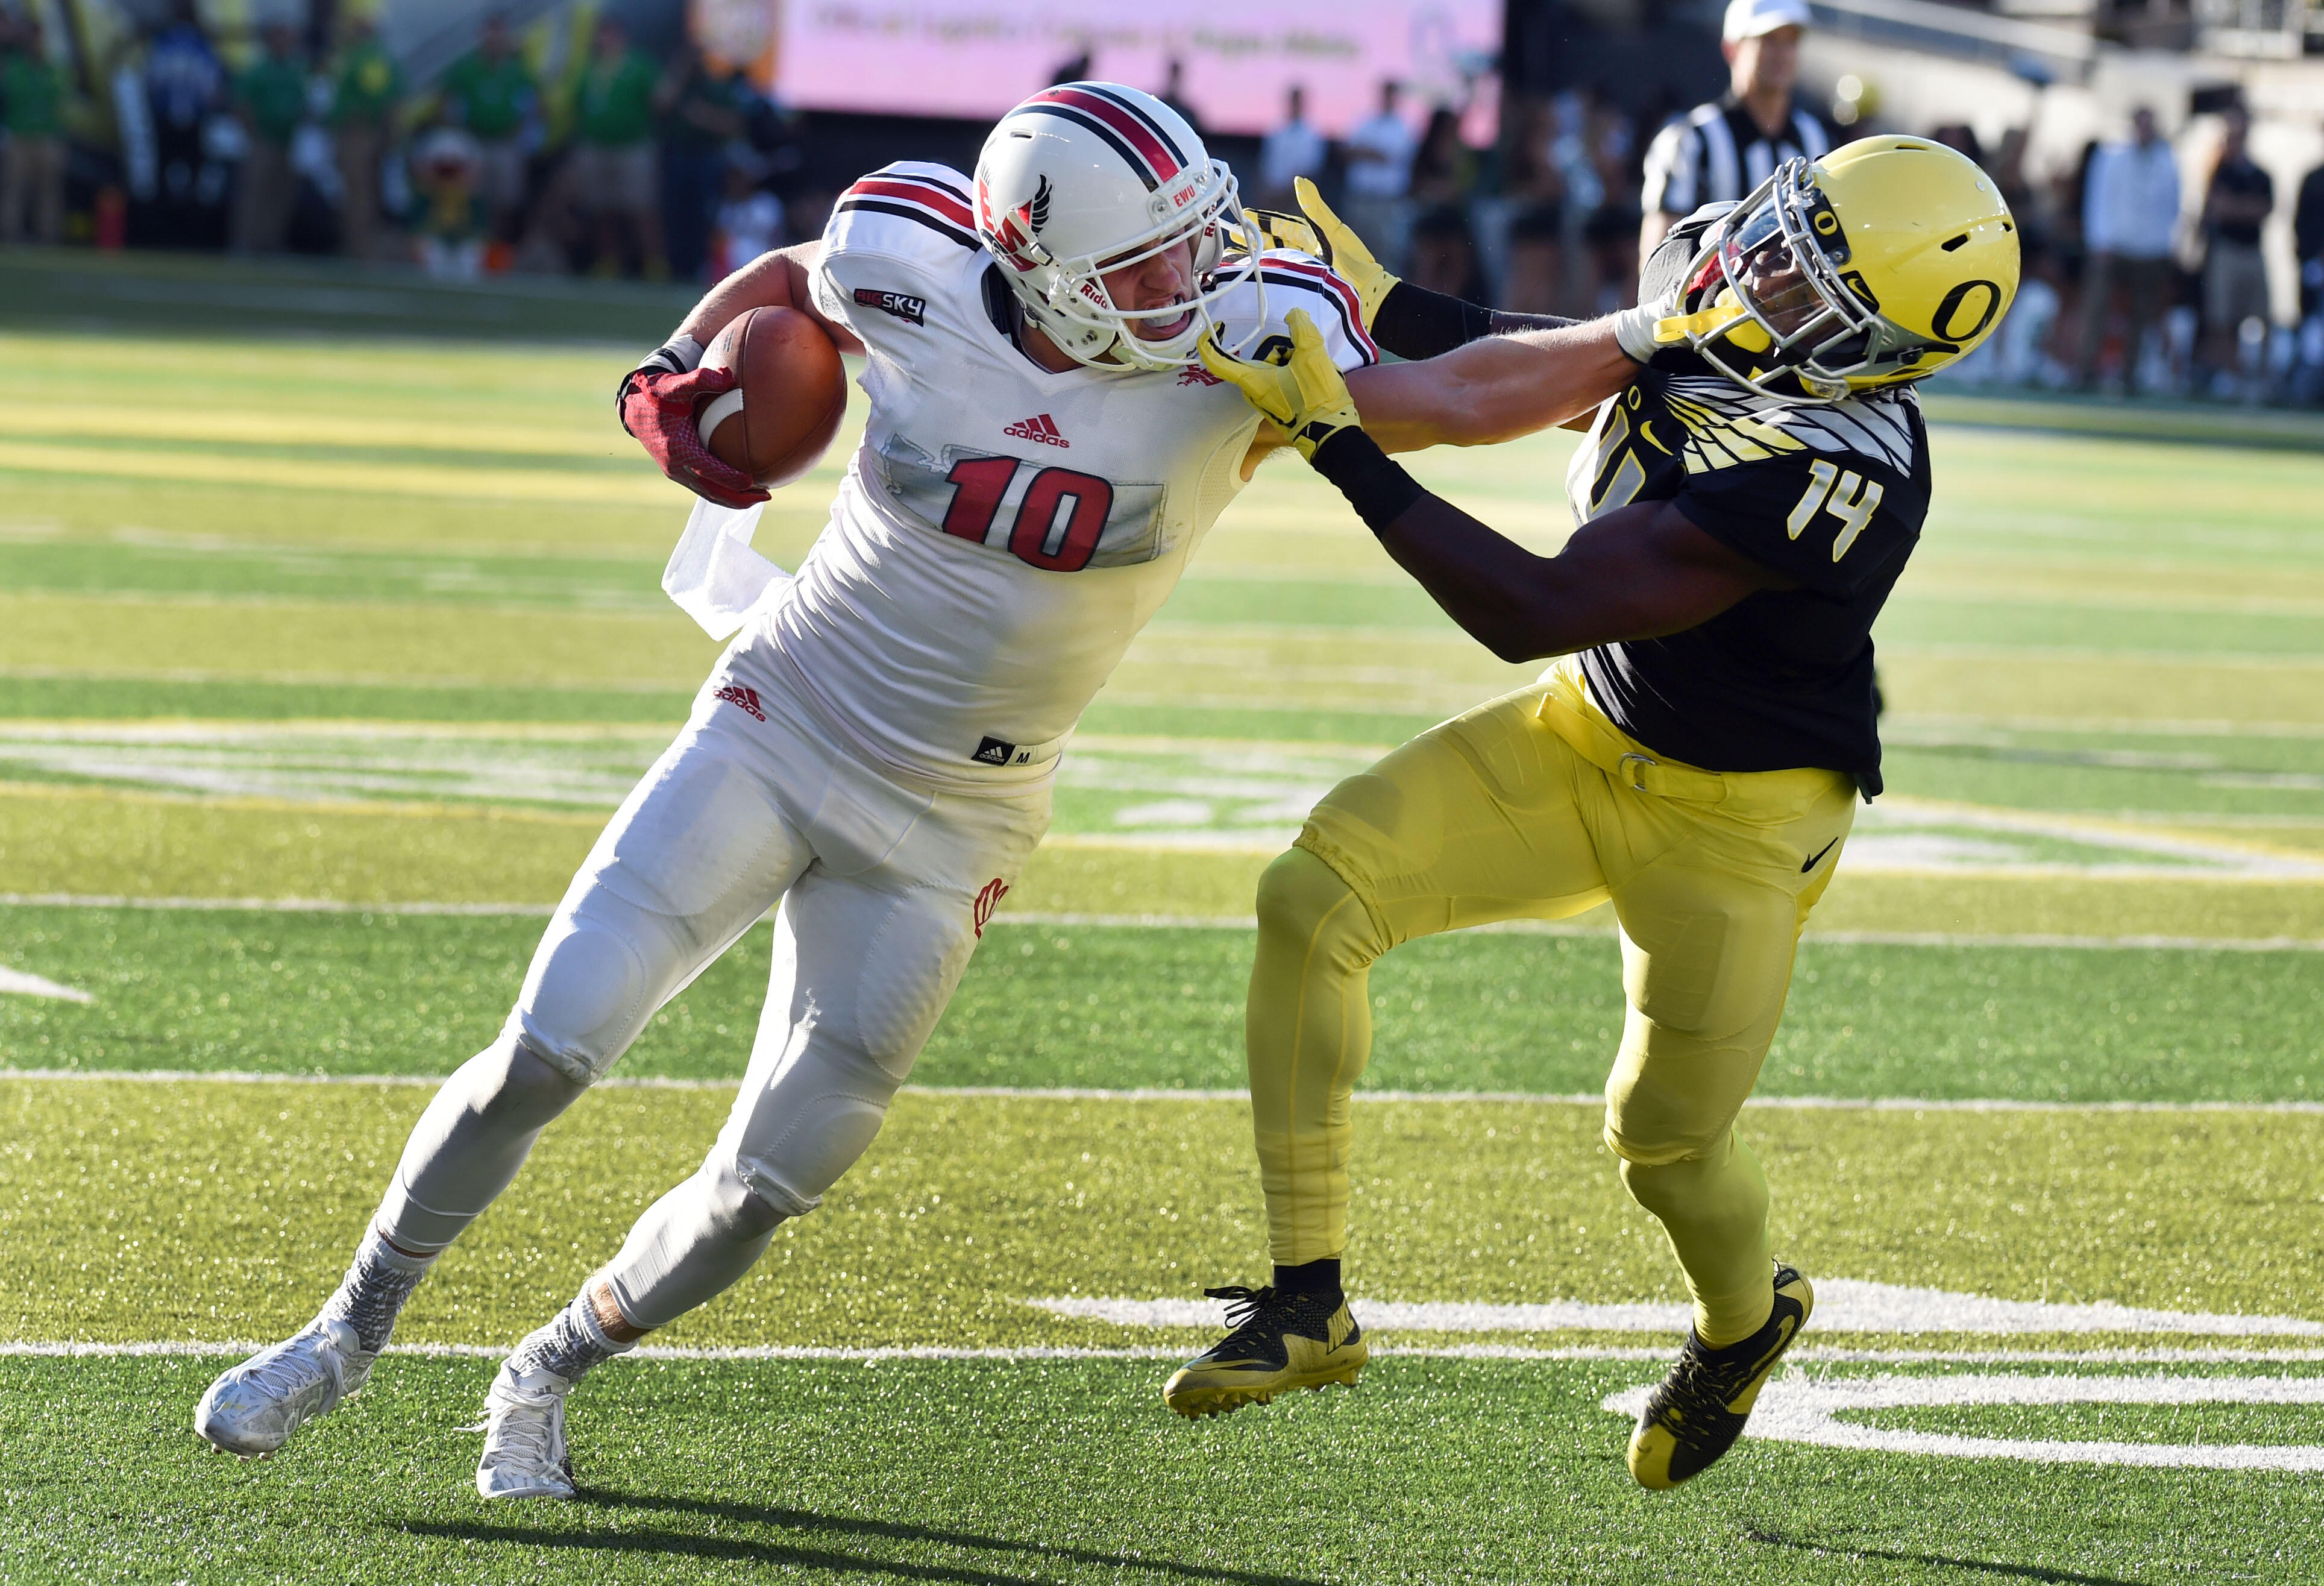 EUGENE, OR - SEPTEMBER 05: Wide receiver Cooper Kupp #10 of the Eastern Washington Eagles stiff arms cornerback Ugo Amadi #14 of the Oregon Ducks on the way to  touchdown during the second quarter of the game against the Oregon Ducks at Autzen Stadium on 